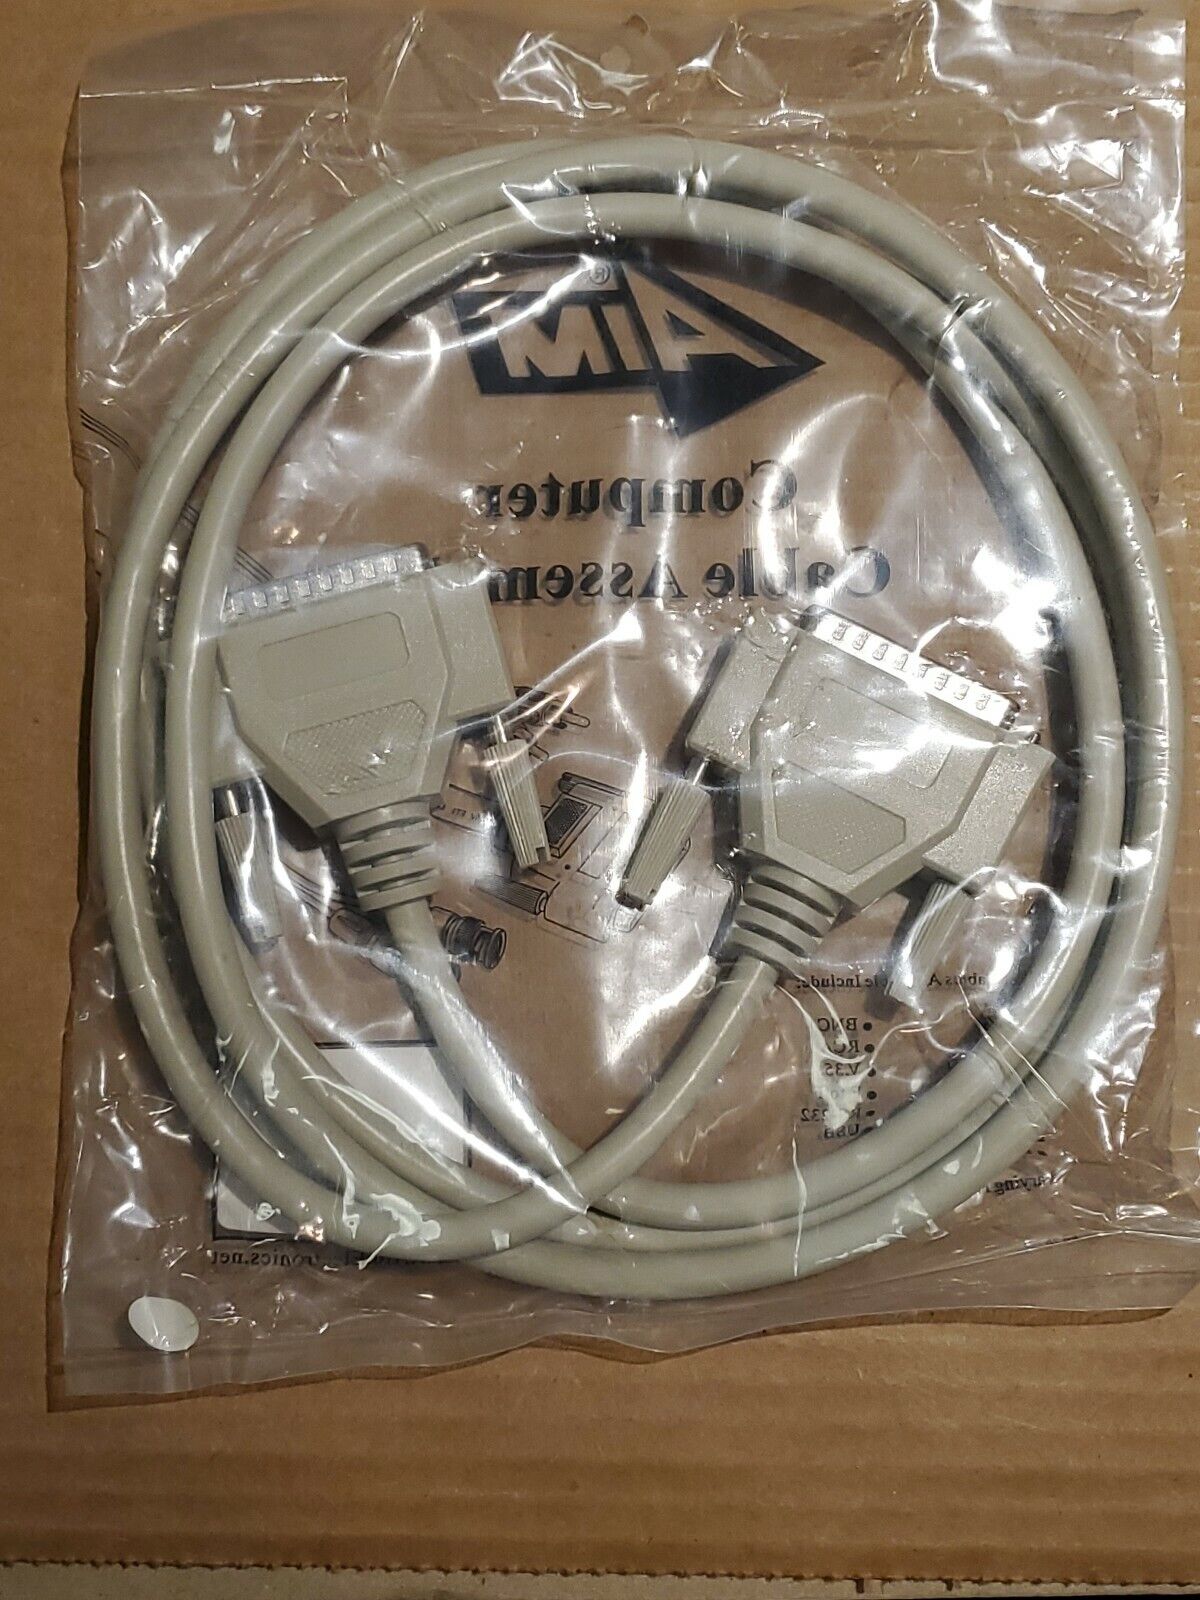 AIM Computer Cable 30-9506MM D-25M To D-25M 25 Cond 6 FT Feet Male To Male.